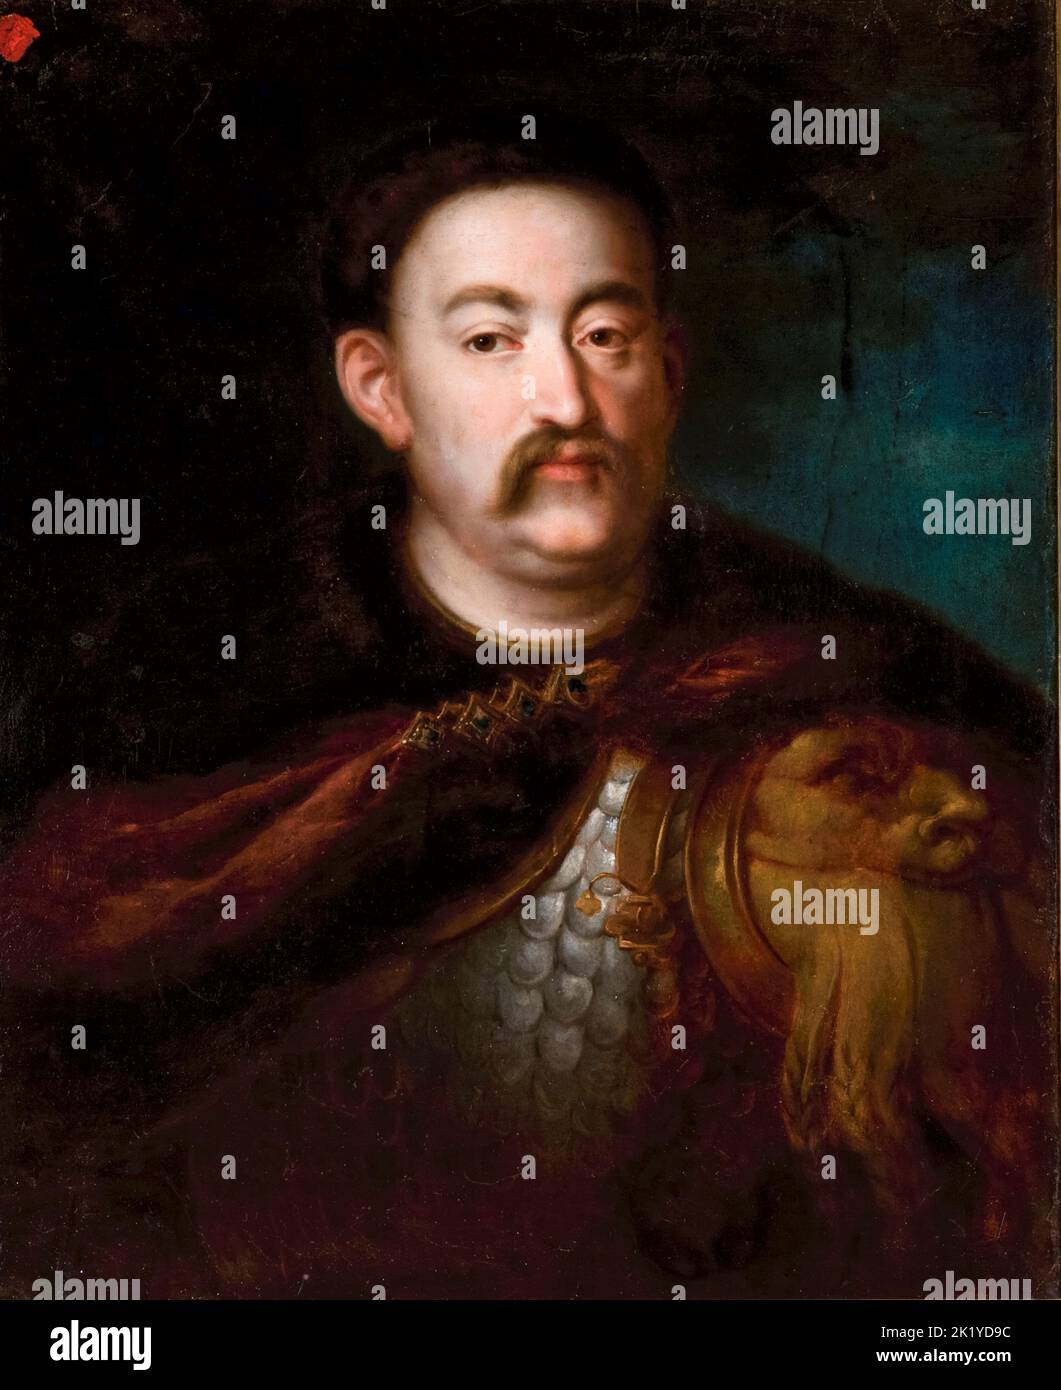 John III Sobieski (1629-1696), King of Poland and Grand Duke of Lithuania (1674-1696), portrait painting in oil on paper by Rafał Hadziewicz, 1834-1839 Stock Photo